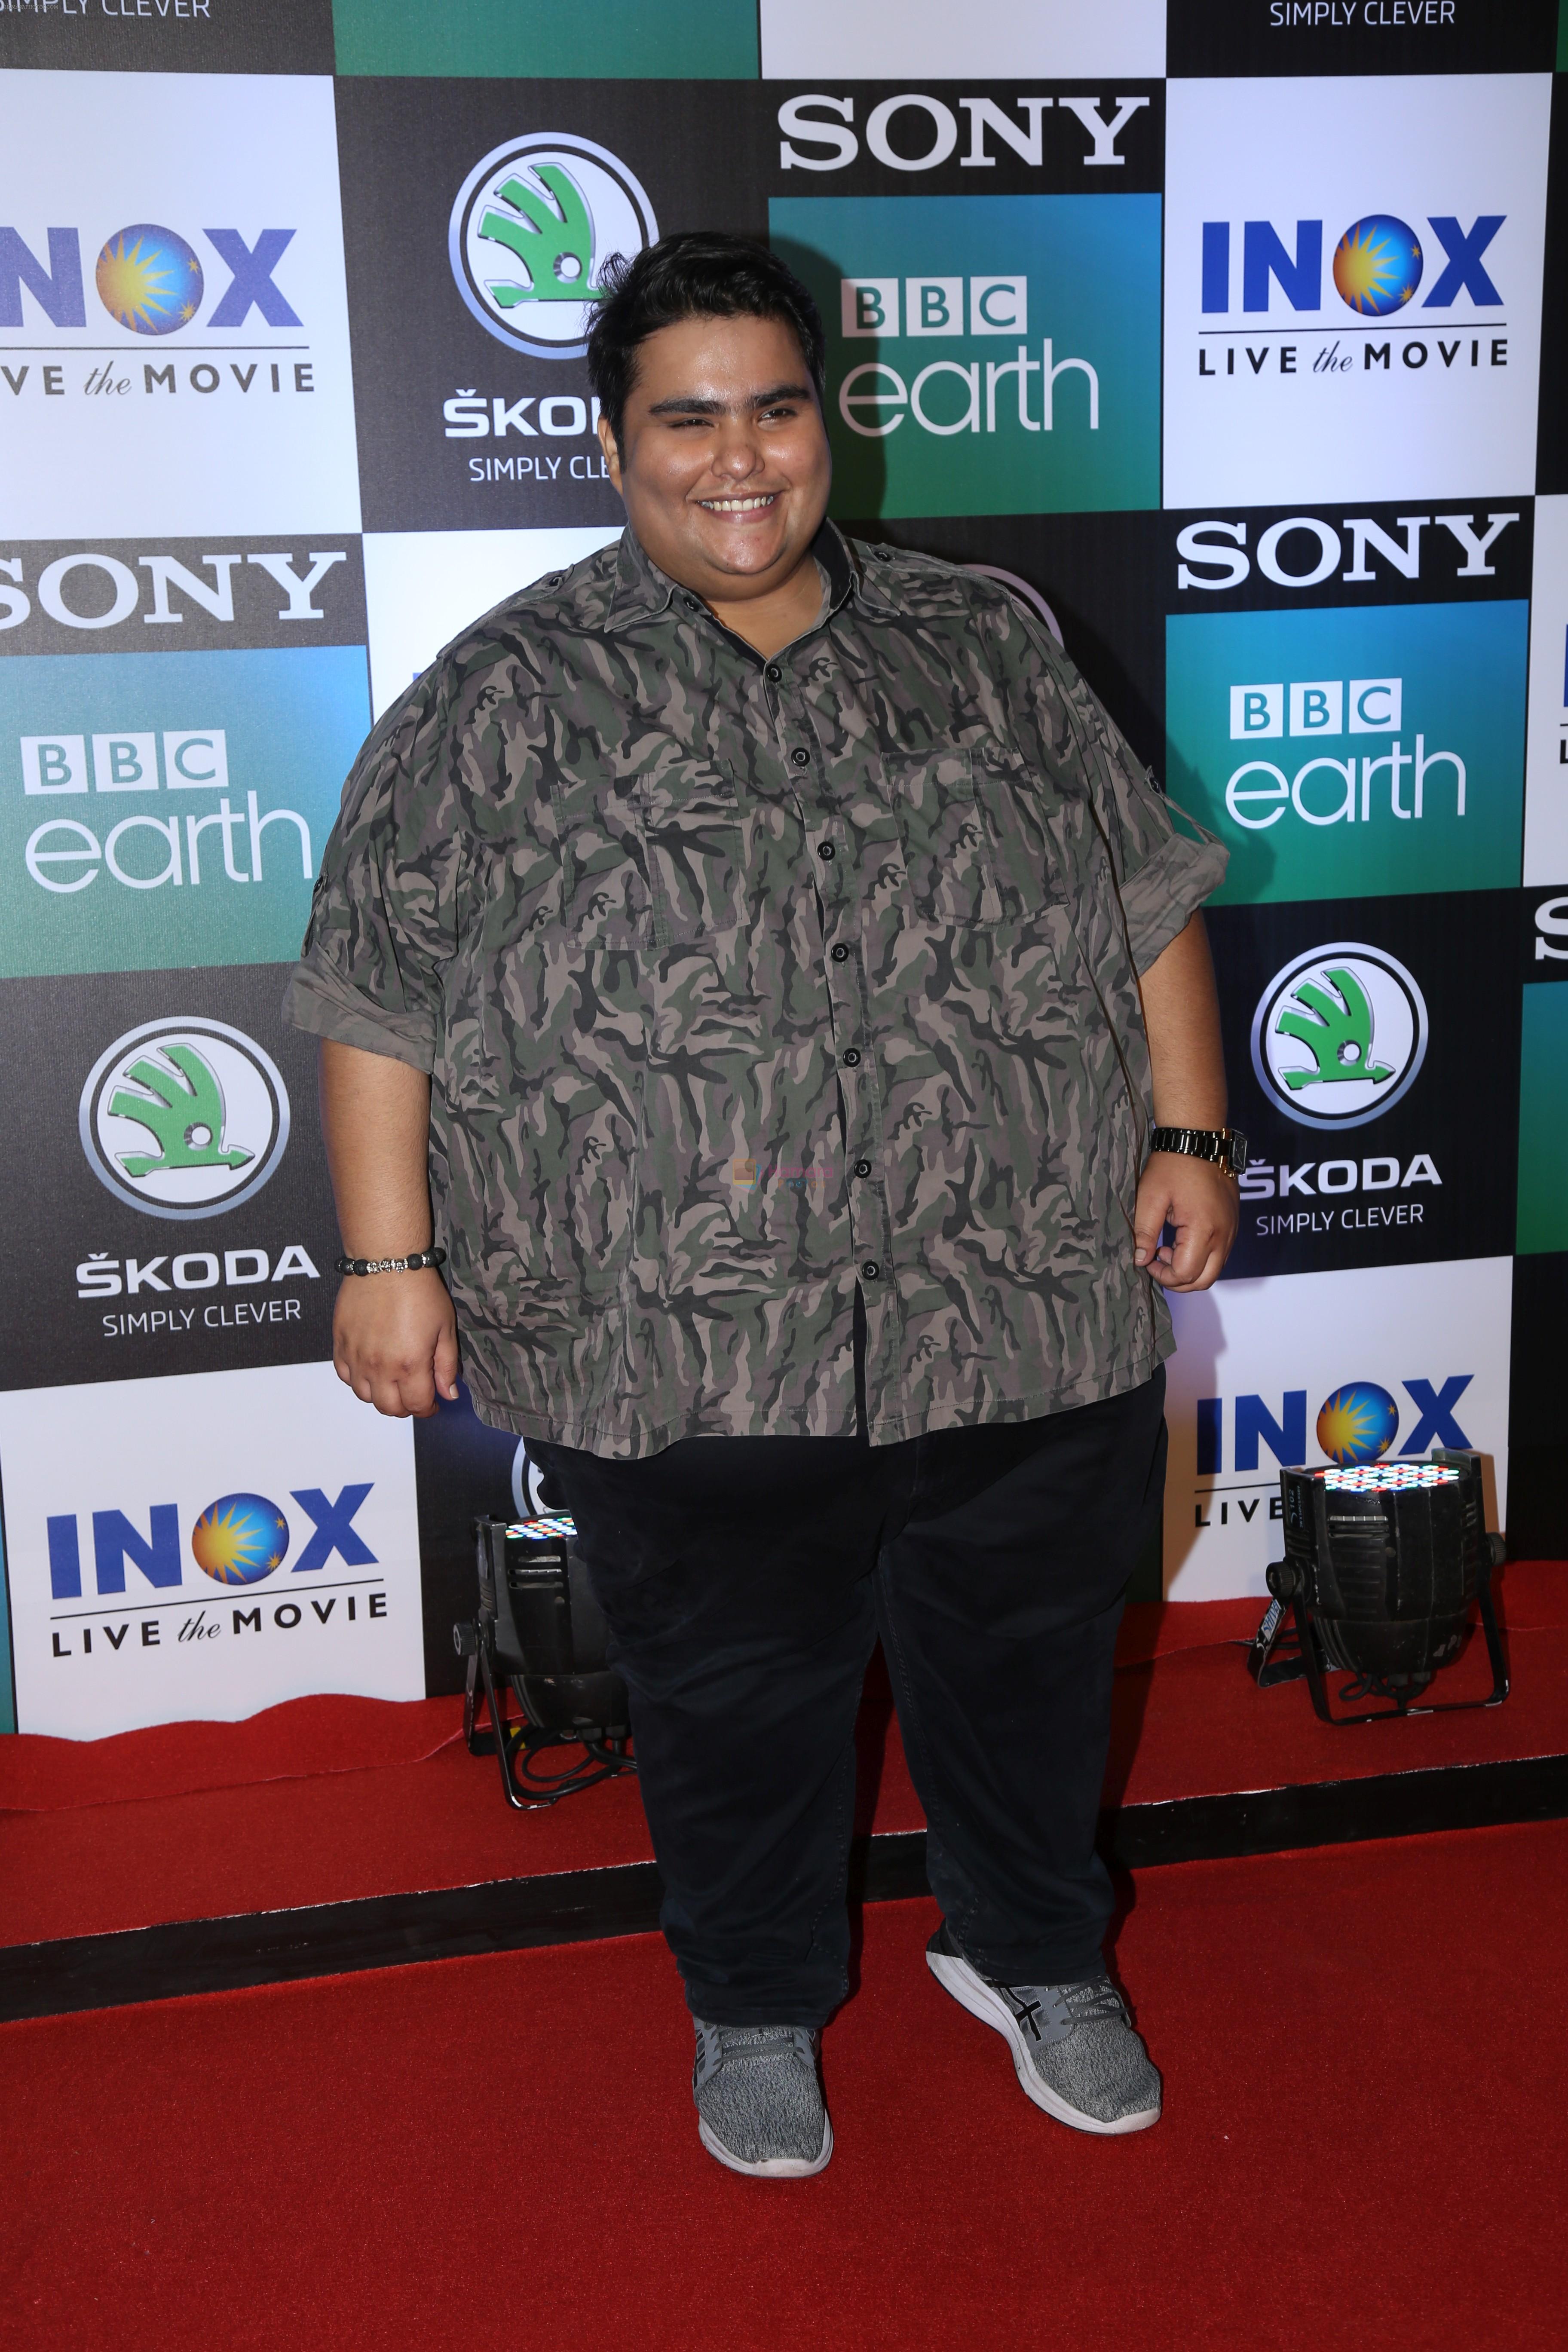 at the Screening of Sony BBC's series Dynasties in worli  on 12th June 2019